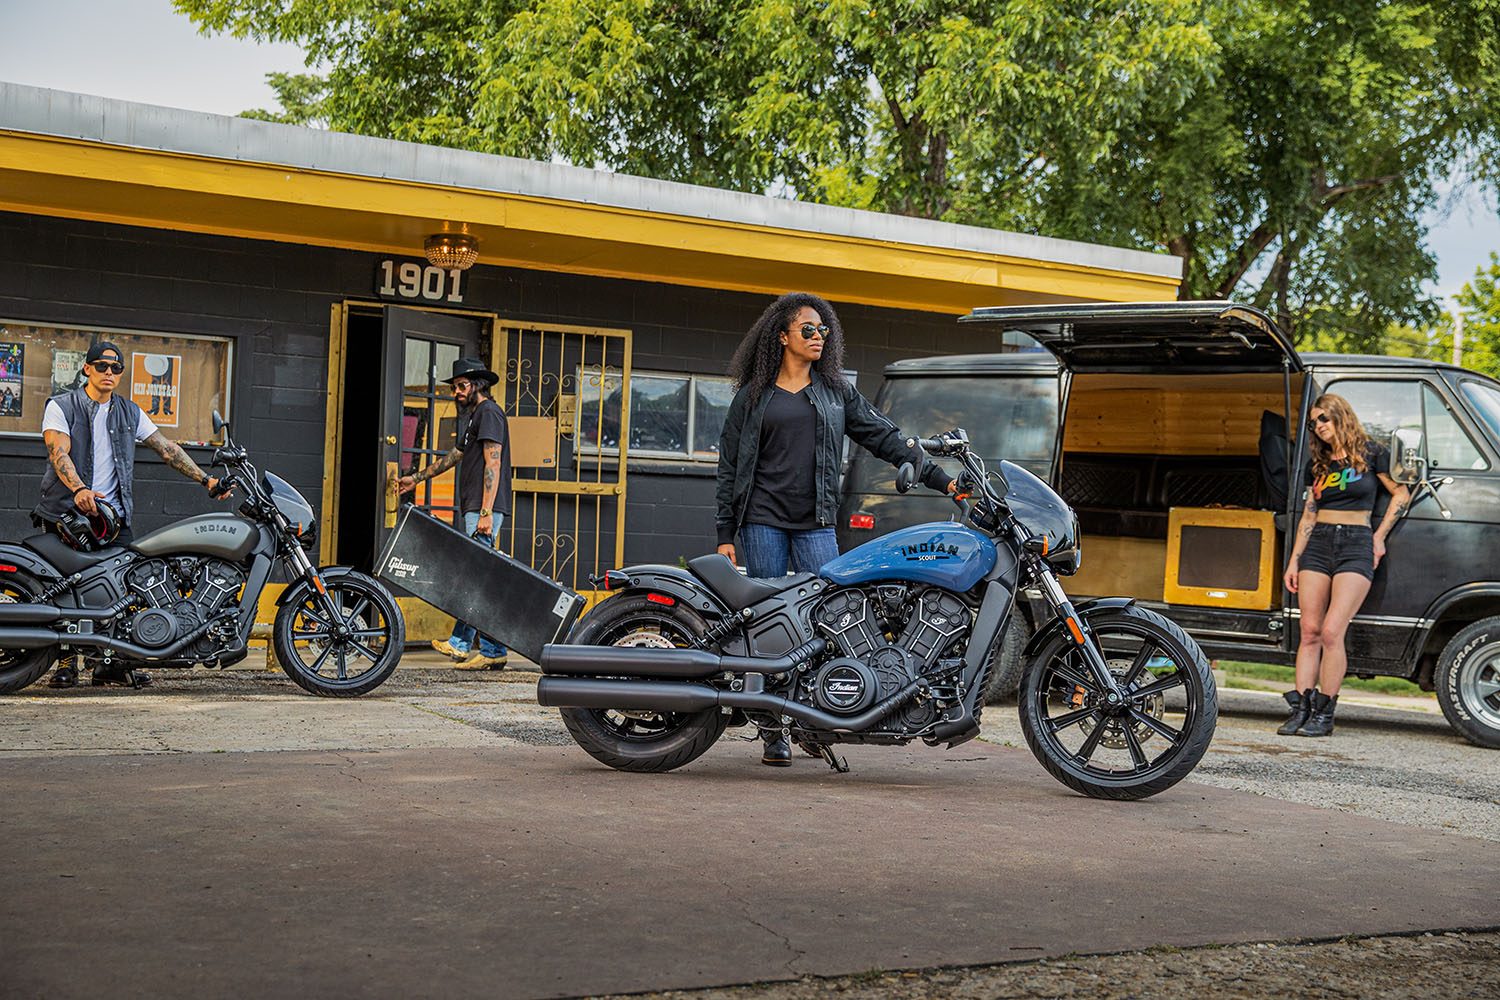 2022 Indian Scout® Rogue ABS in Chesapeake, Virginia - Photo 11